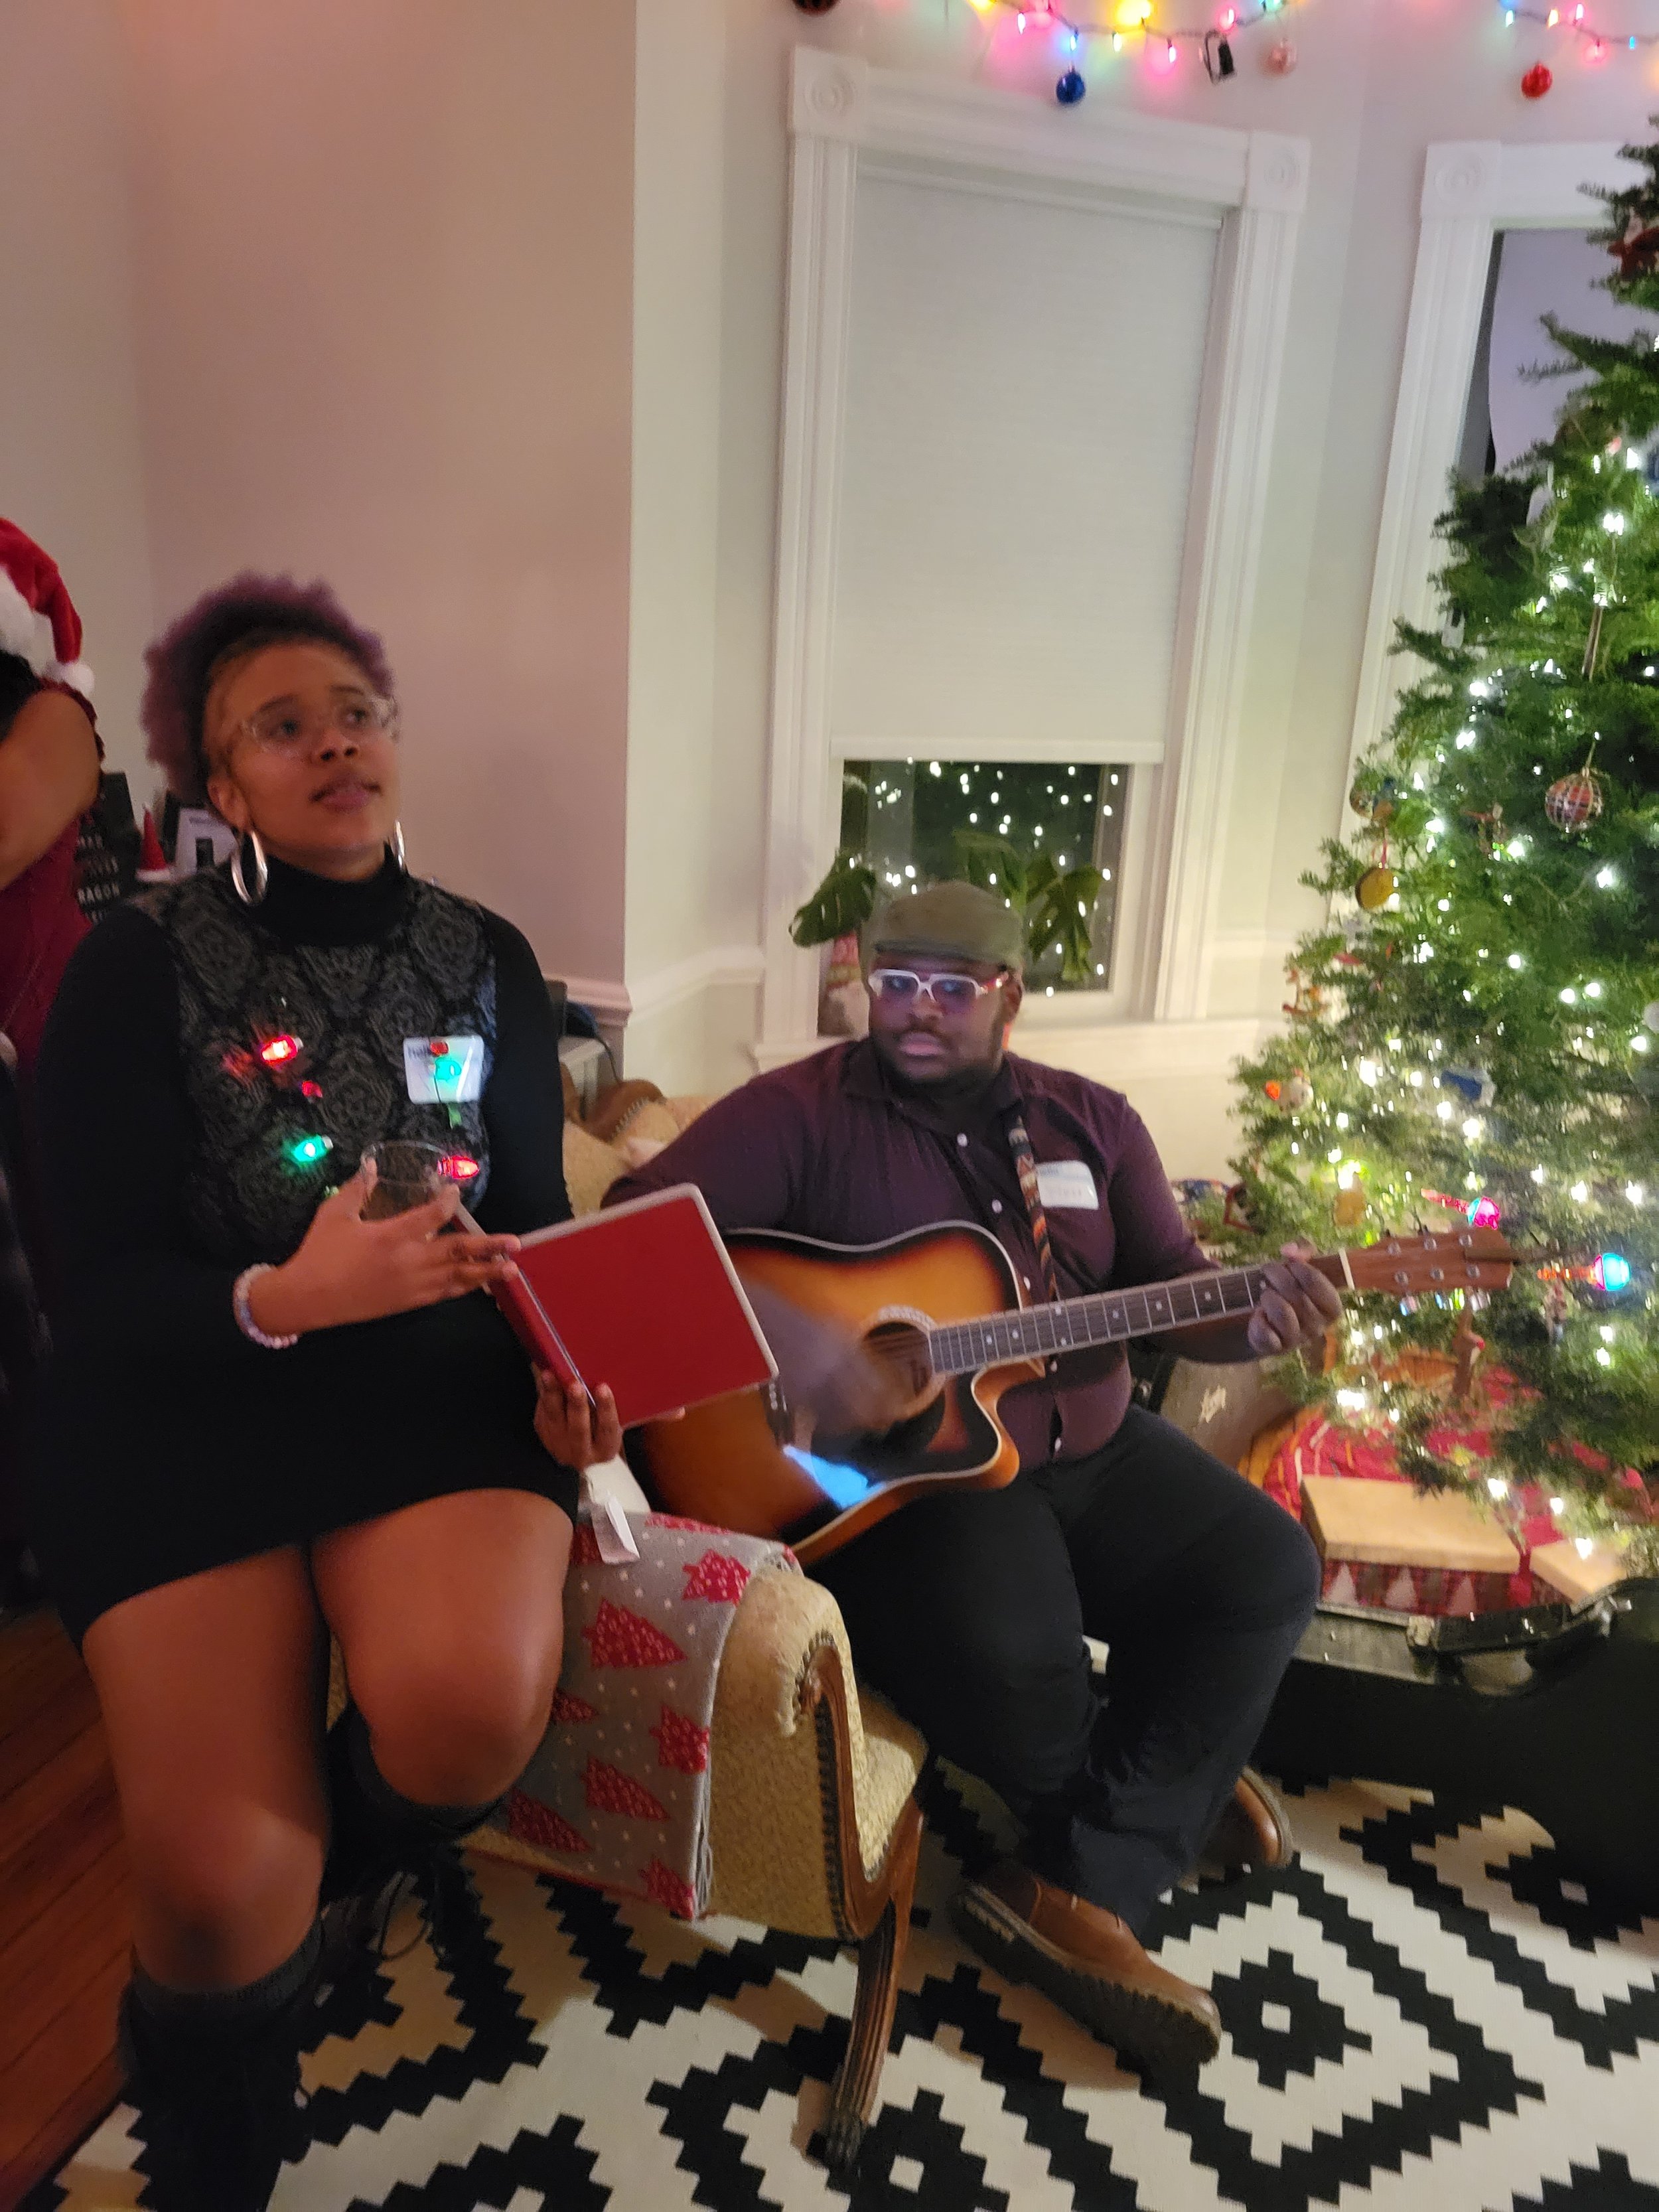    Vocal percussionist and Alto, Amber Leigh, holding up an iPad for our Executive Director, Vince, to read music from as he plays guitar for an instrument accompanied number at a private Christmas party Noteworthy performed at in 2022.   